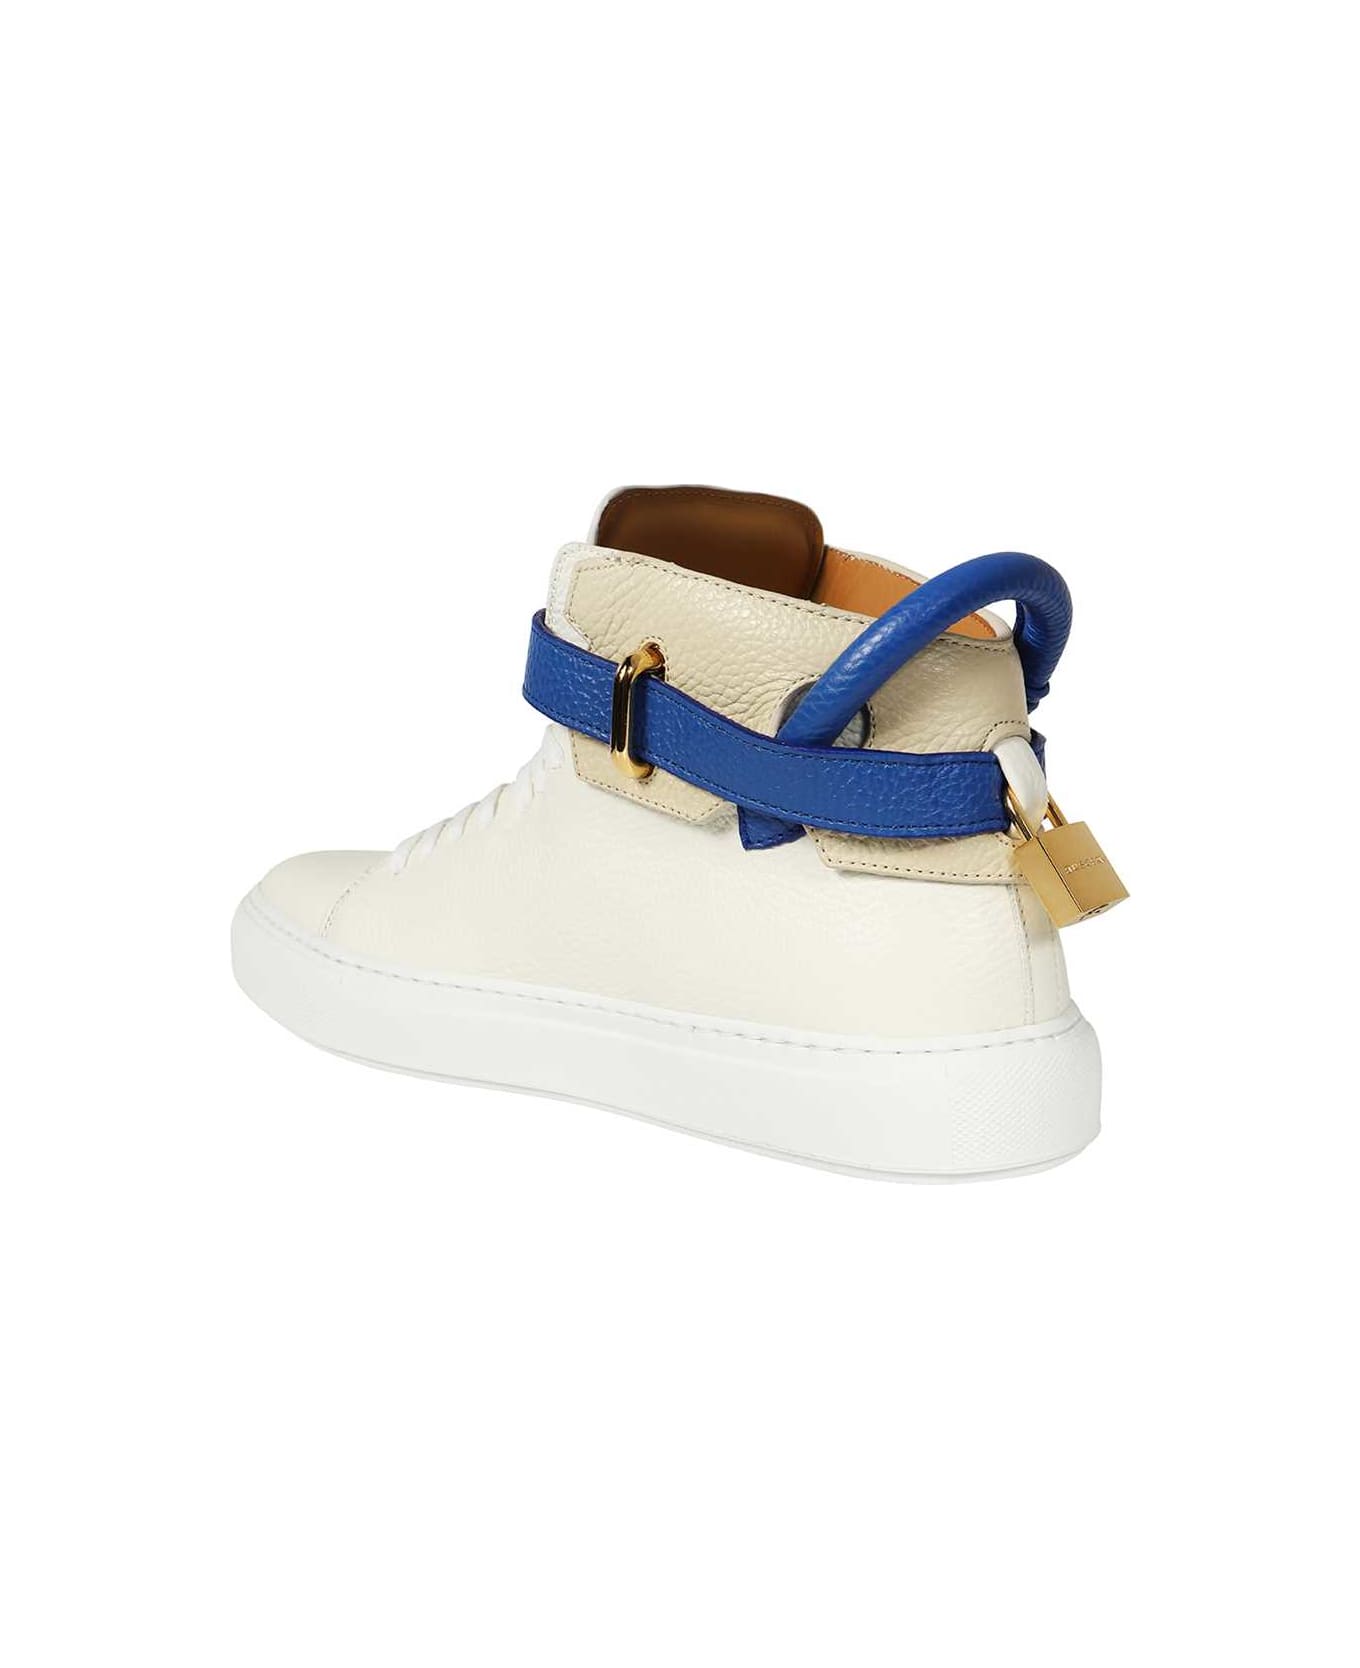 Buscemi Leather High-top Sneakers - White スニーカー